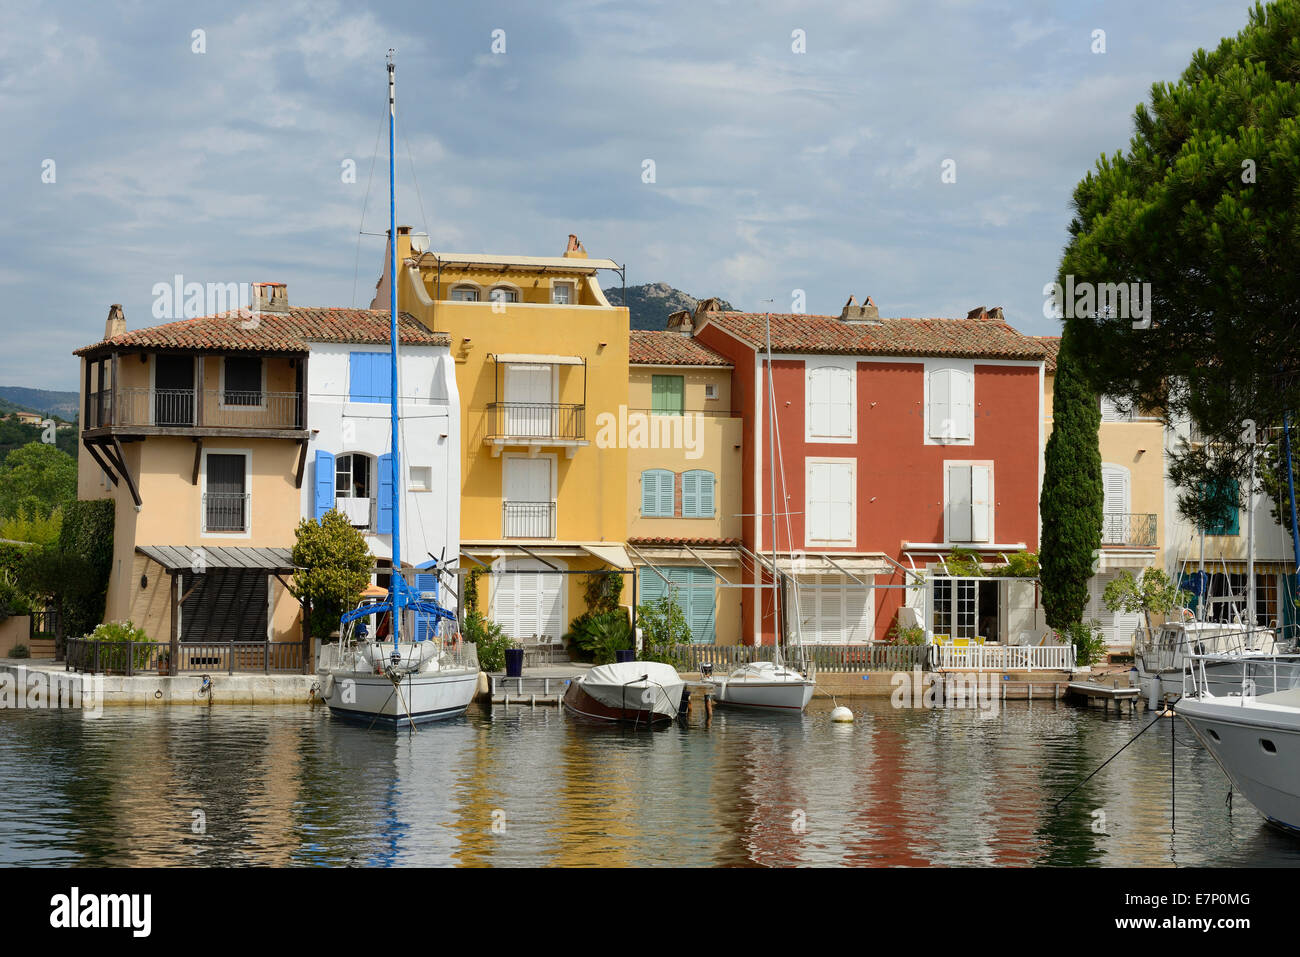 Europe, France, Provence-Alpes-Côte d'Azur, Provence, Port Grimaud, boats, homes Stock Photo